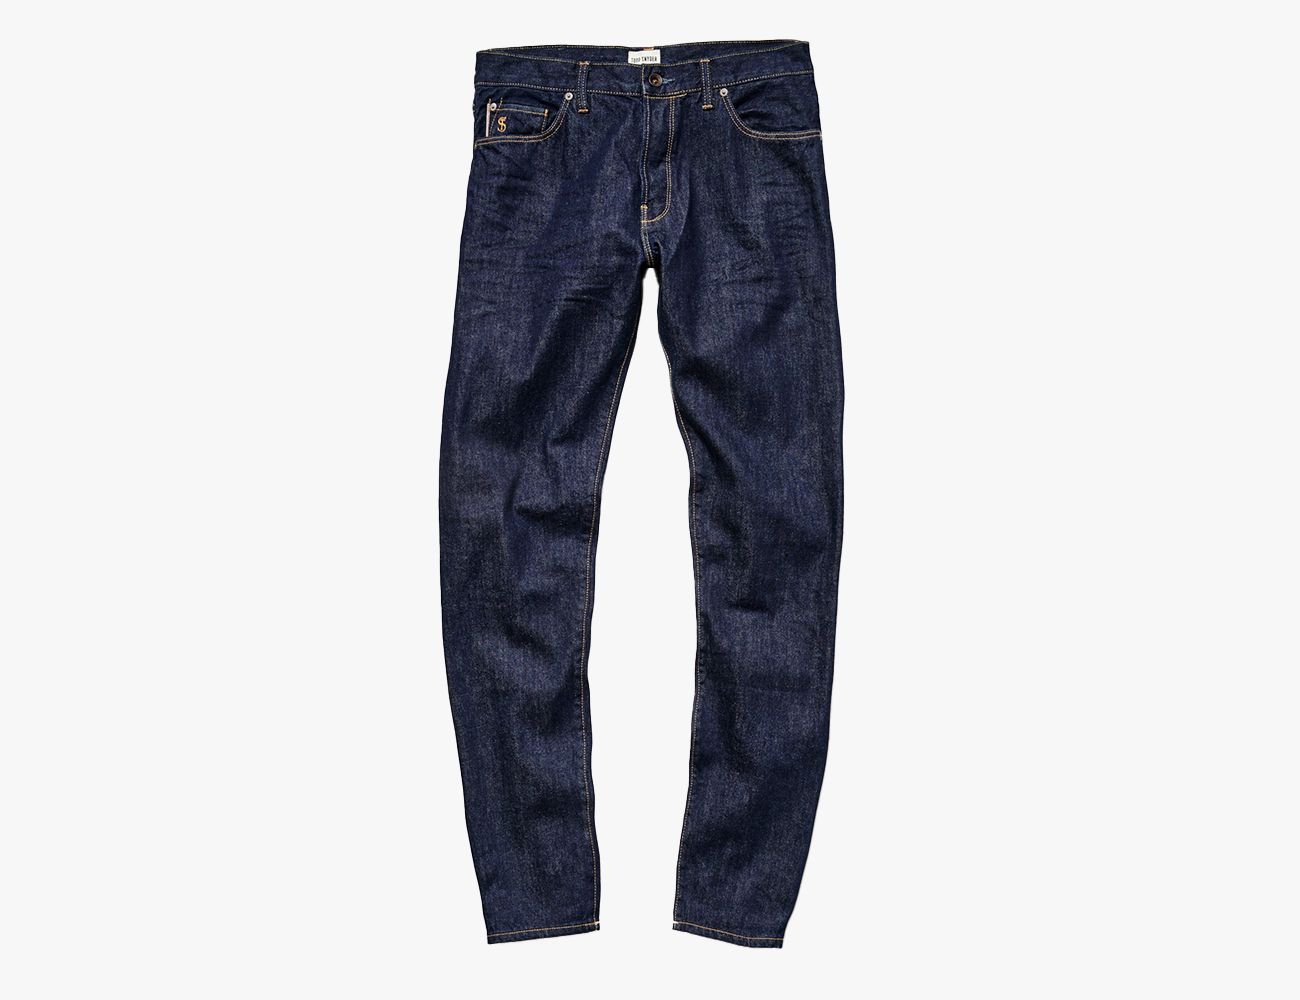 How to cuff jeans (8 common ways). Denim FAQ by Denimhunters